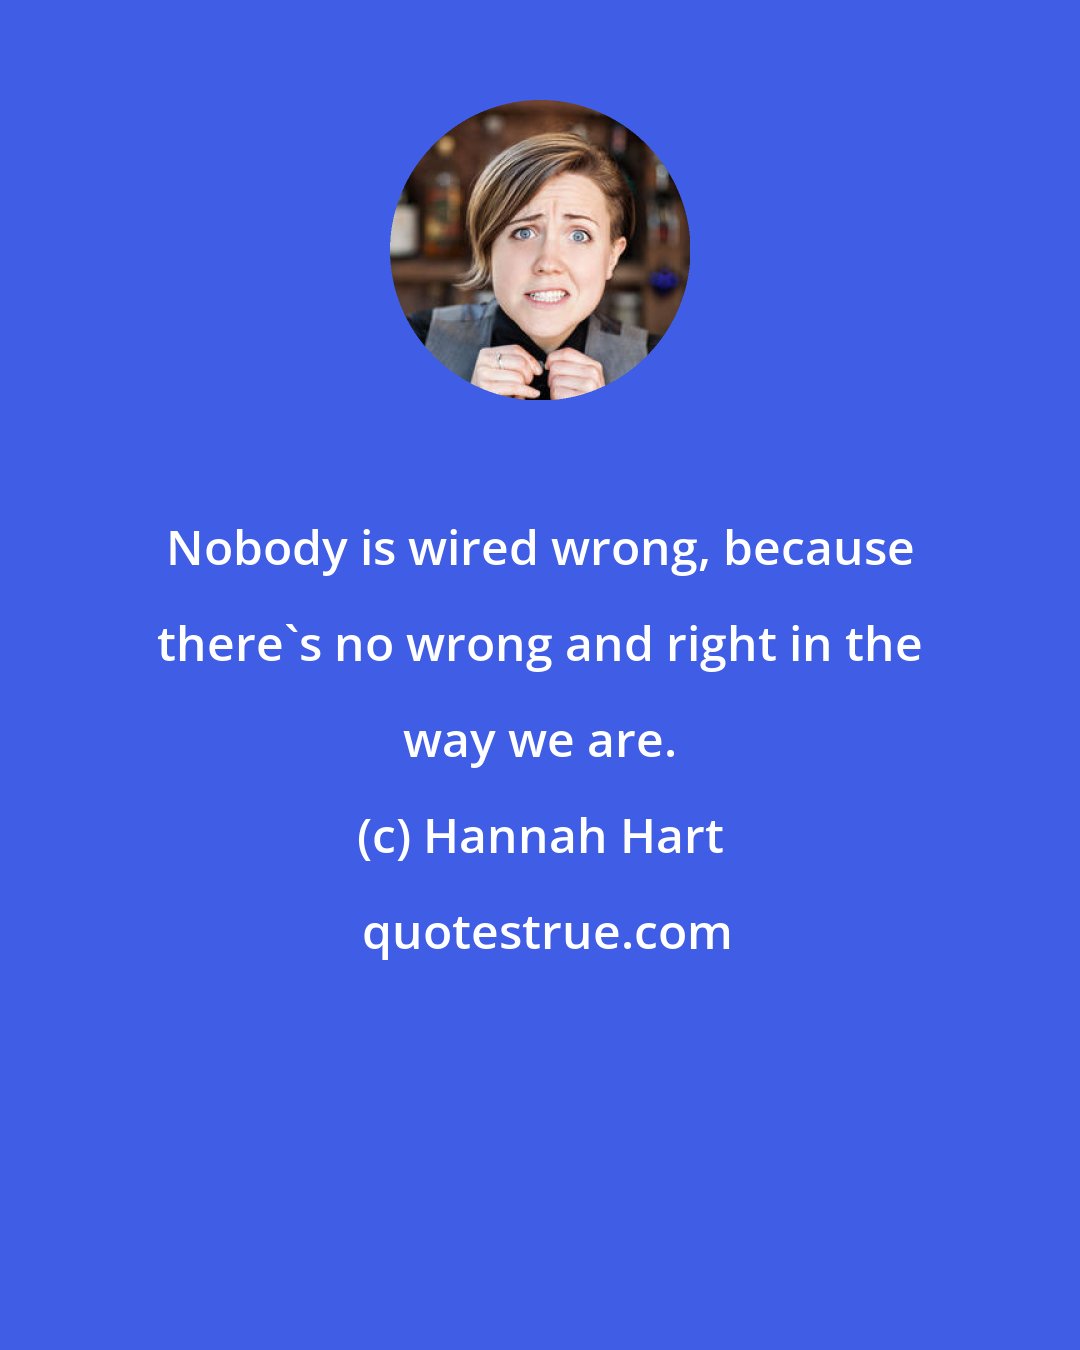 Hannah Hart: Nobody is wired wrong, because there's no wrong and right in the way we are.